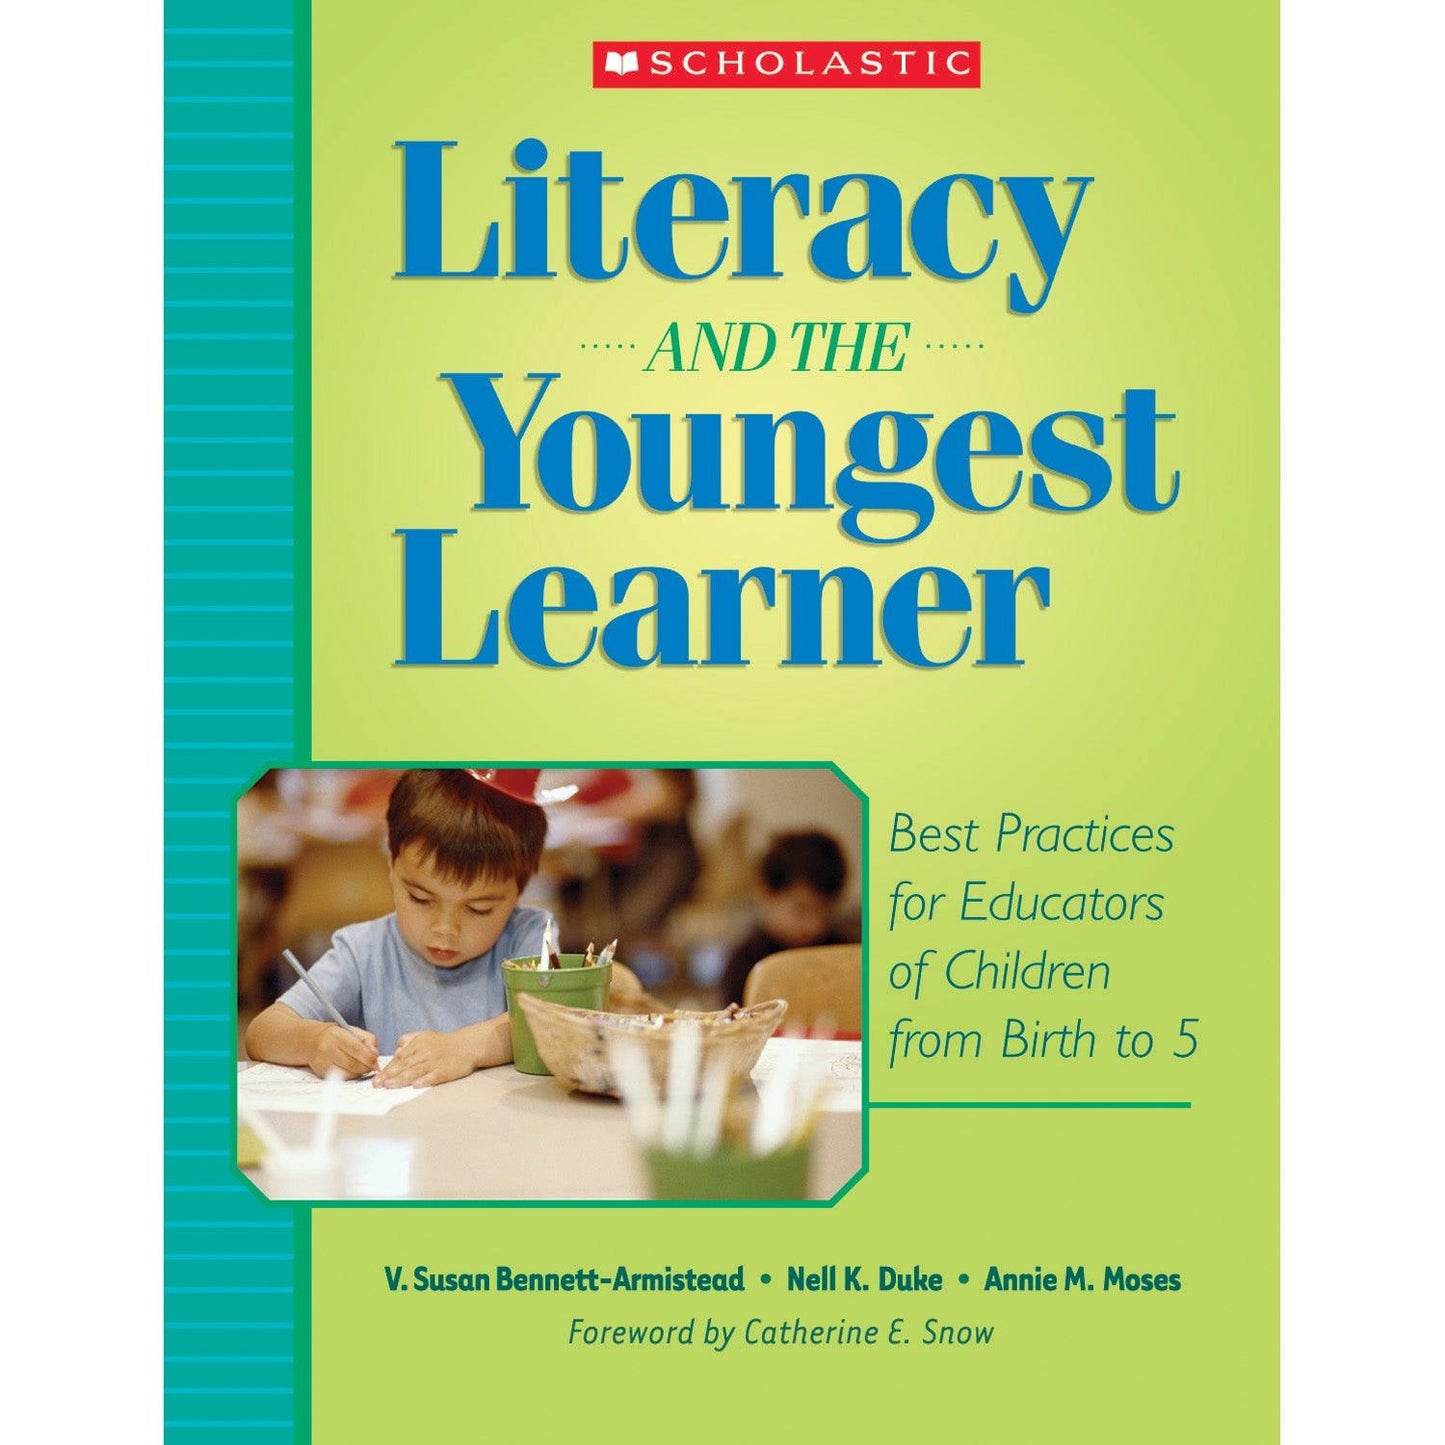 Literacy and the Youngest Learner - Loomini